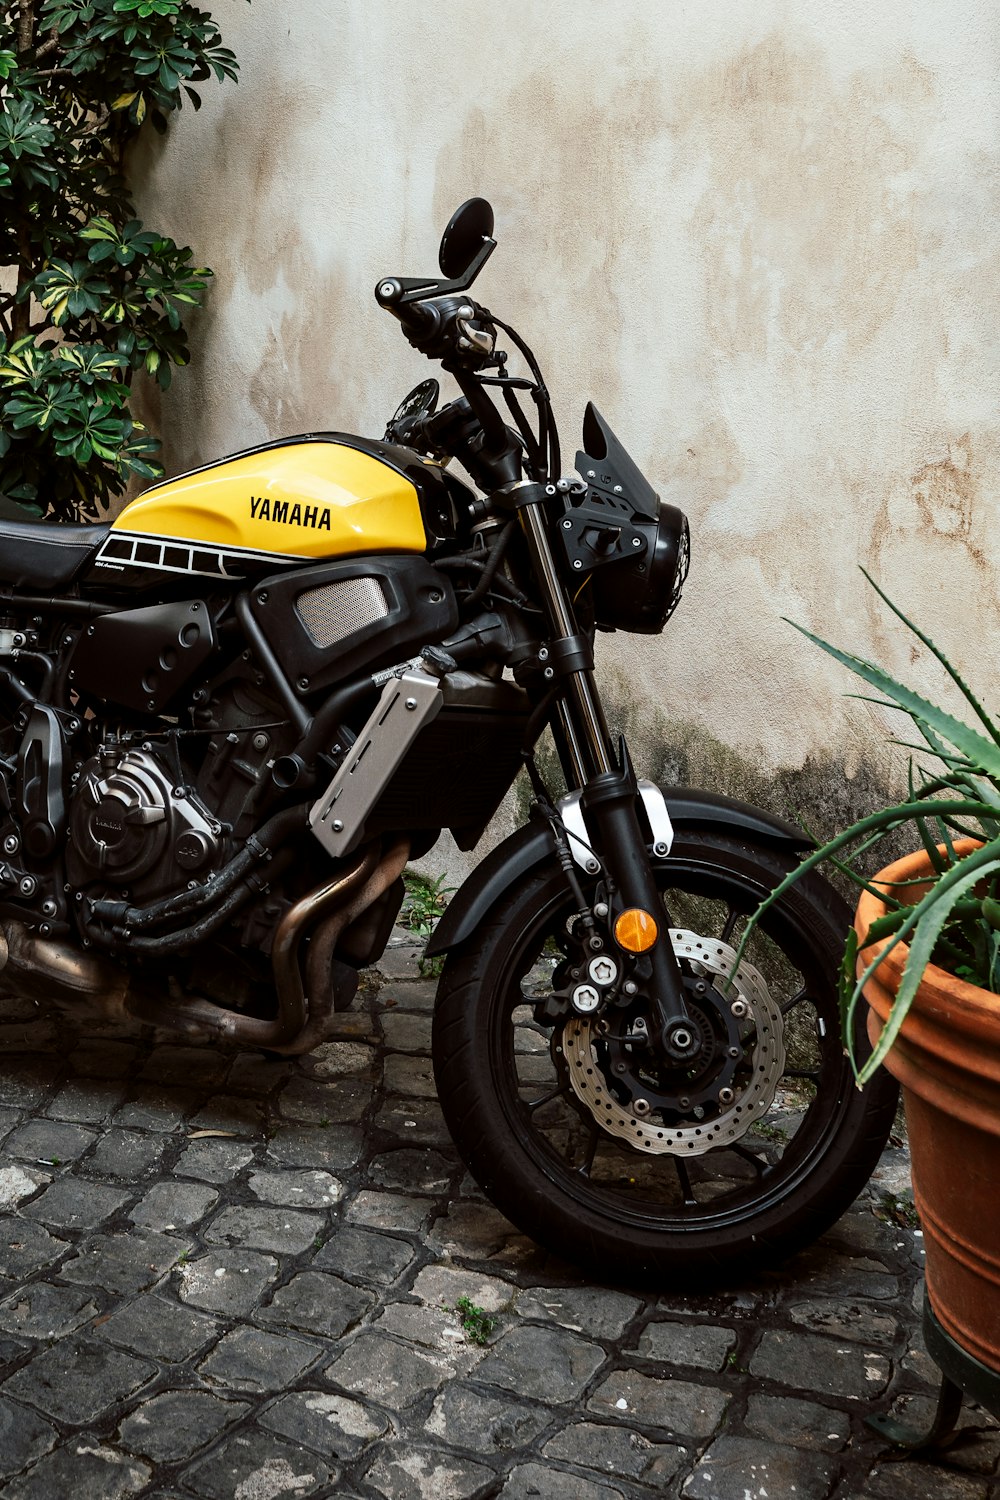 a yellow and black motorcycle parked next to a potted plant